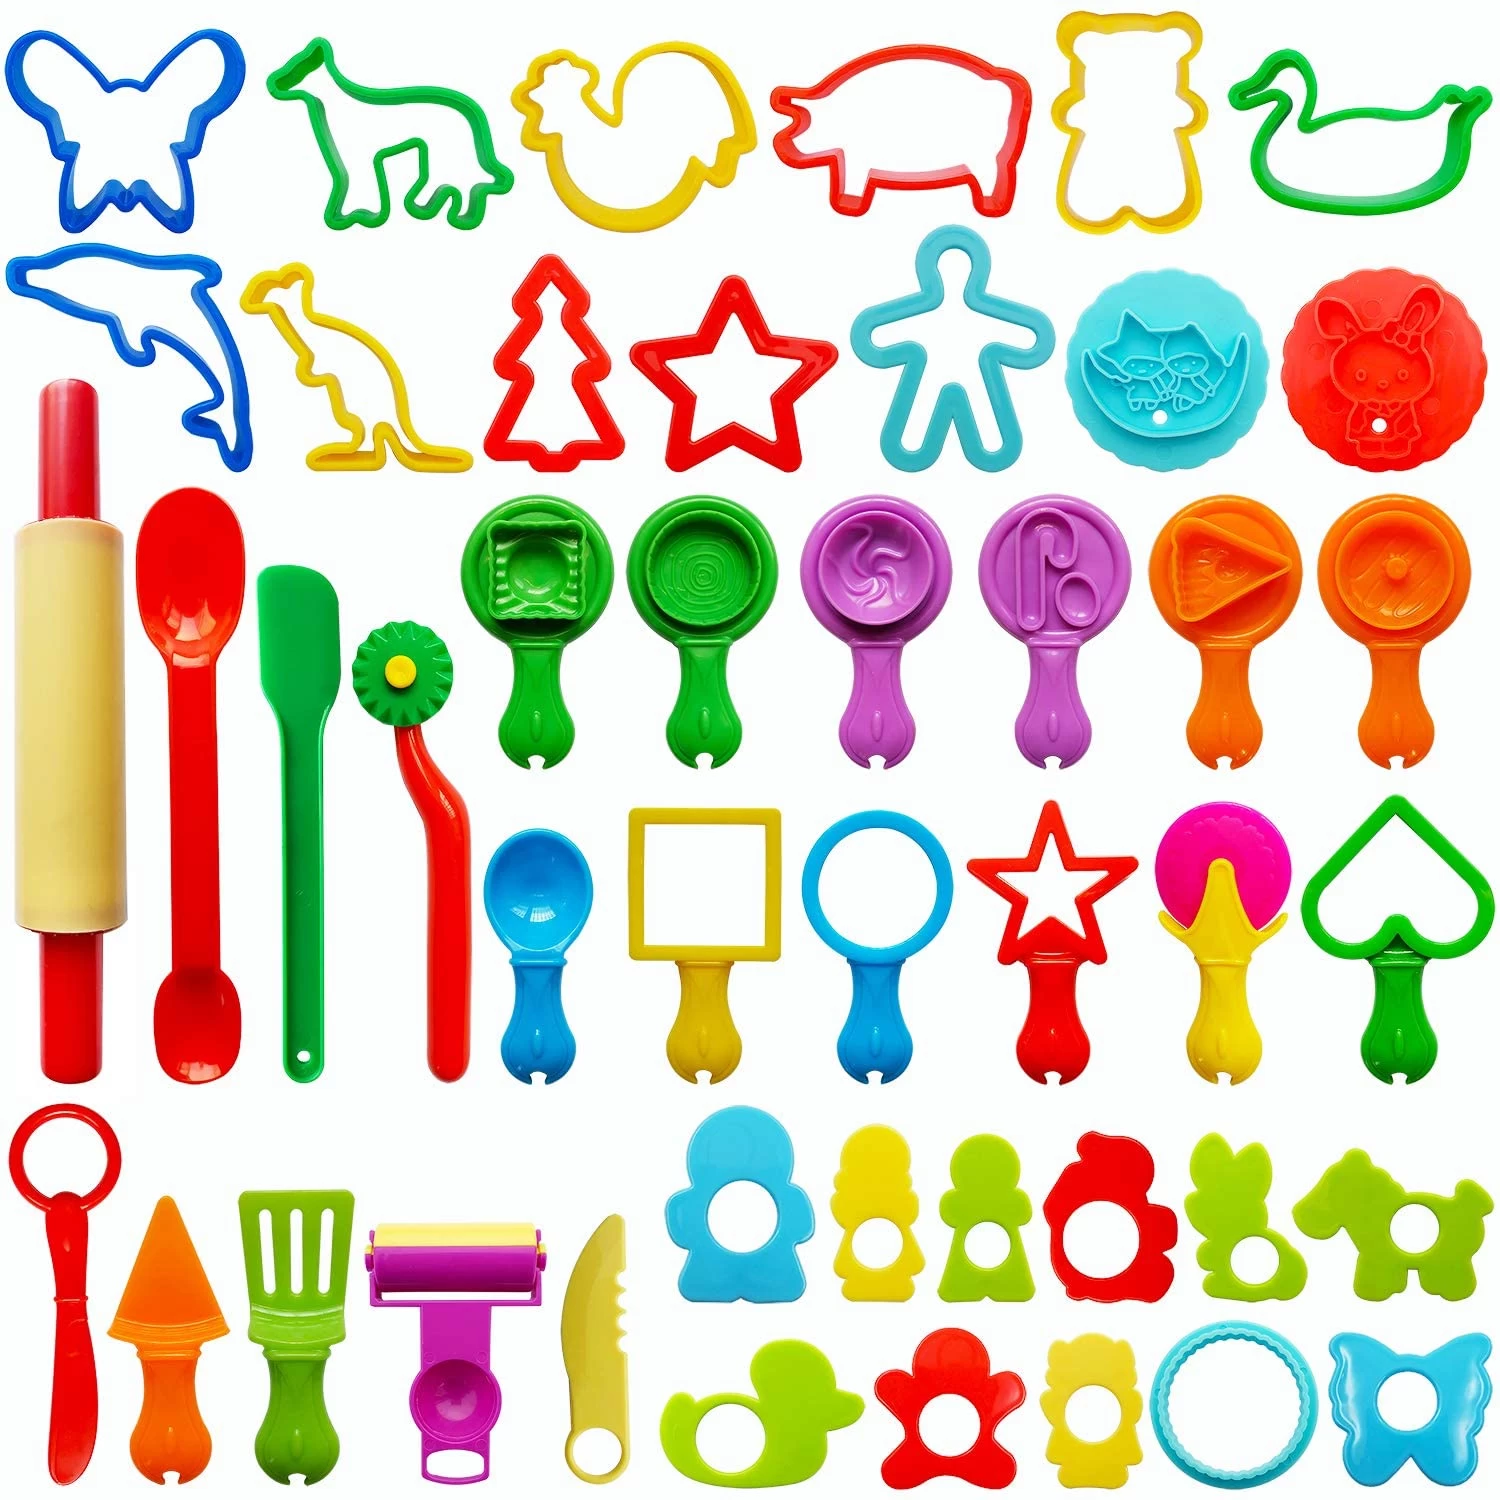 Miscellaneous Playdoh Tools/cutters/molds